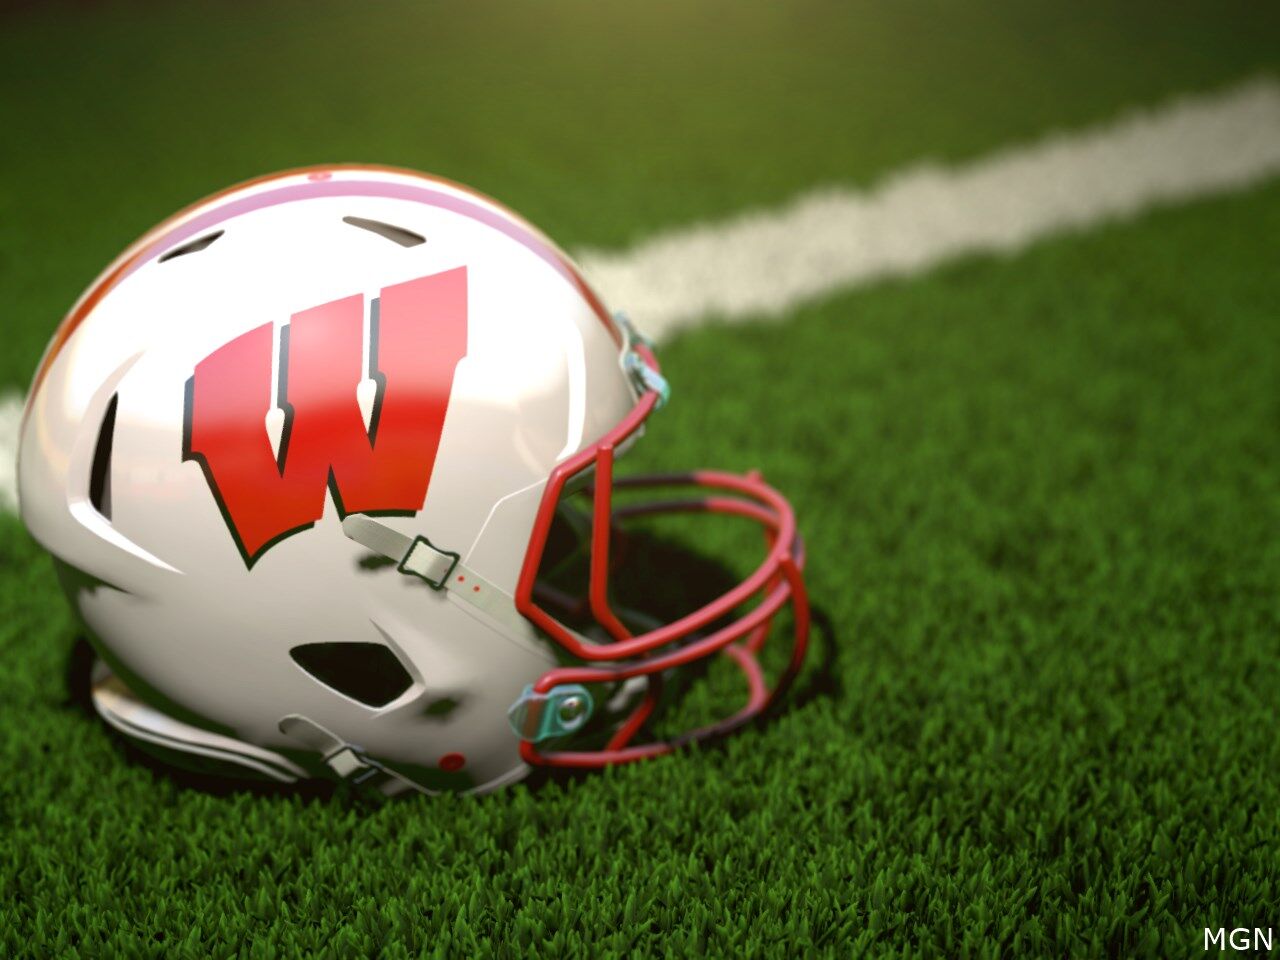 UW-Madison makes top 5 in RotoWire top college football tailgates American Football wkow